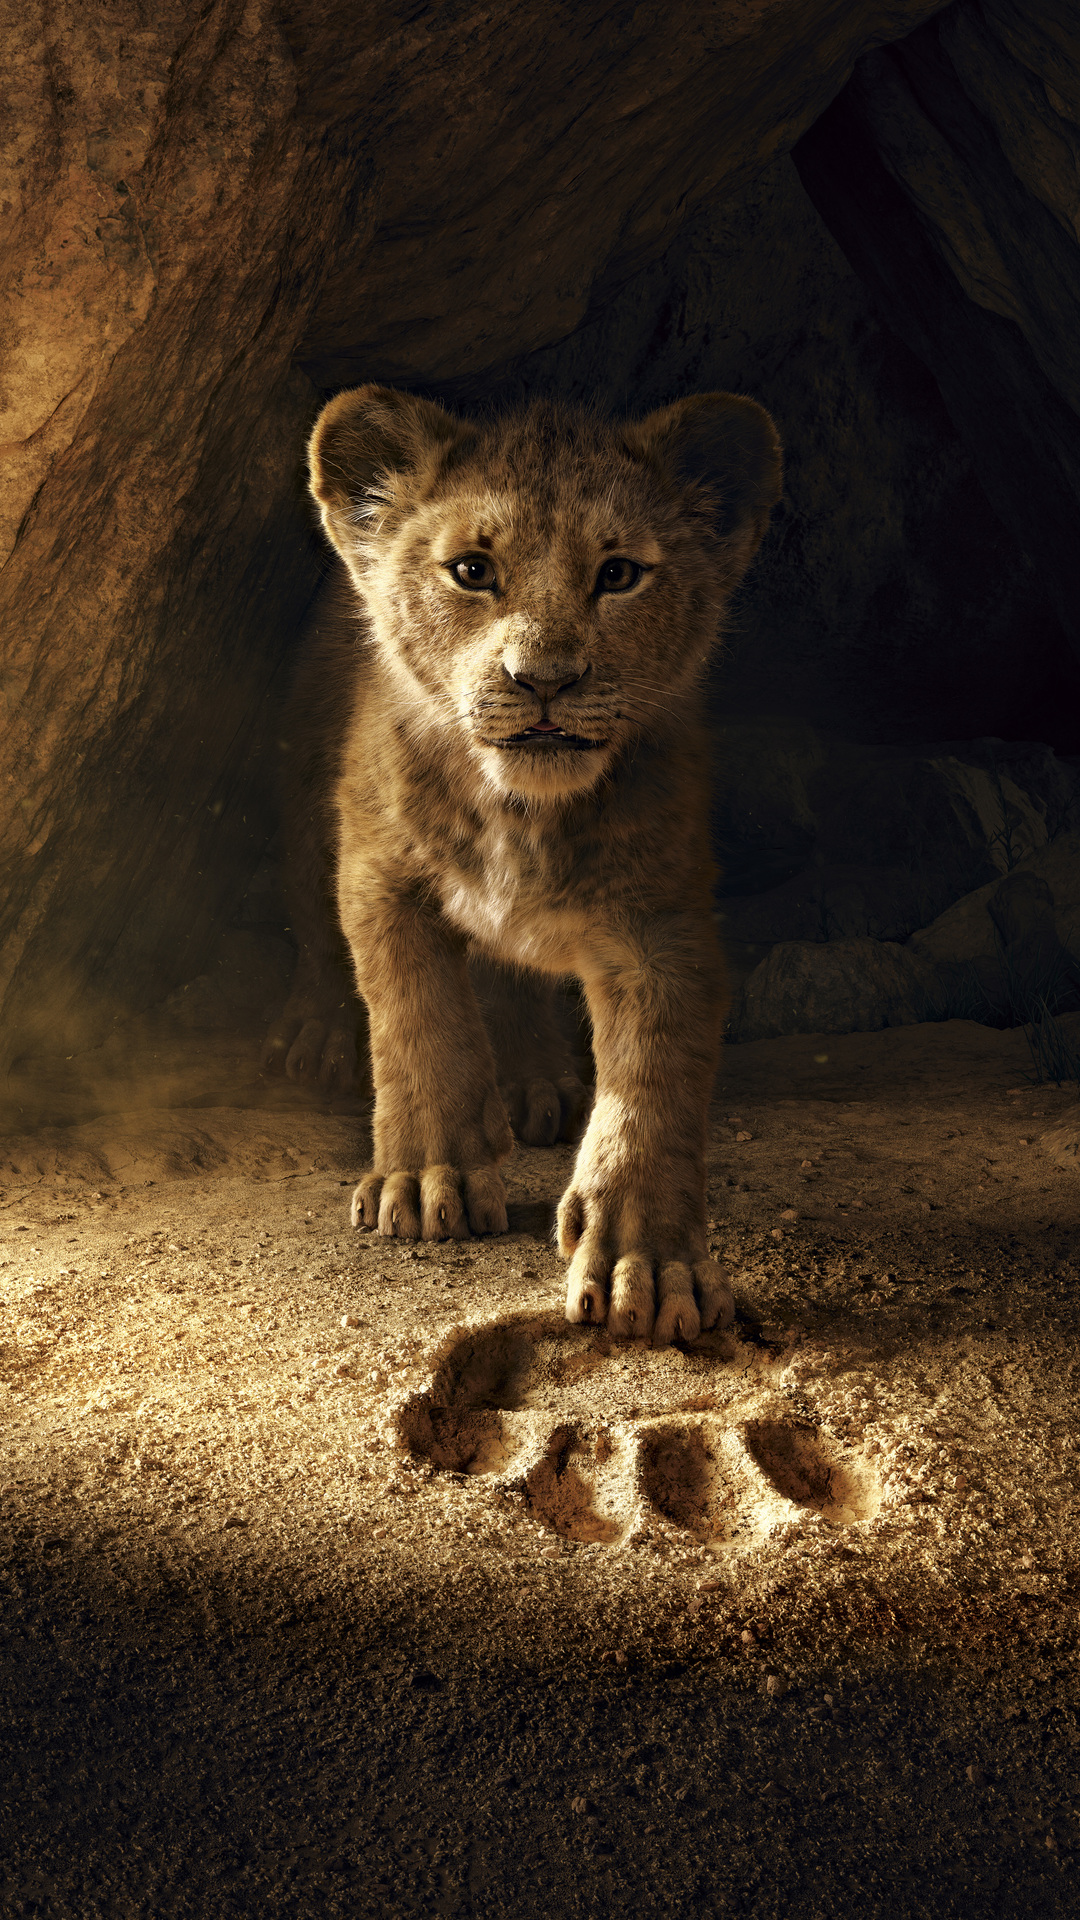 1080x1920 the lion king, lion, 2019 movies, movies, hd, disney, simba, 8k for iPhone 8 wallpaper